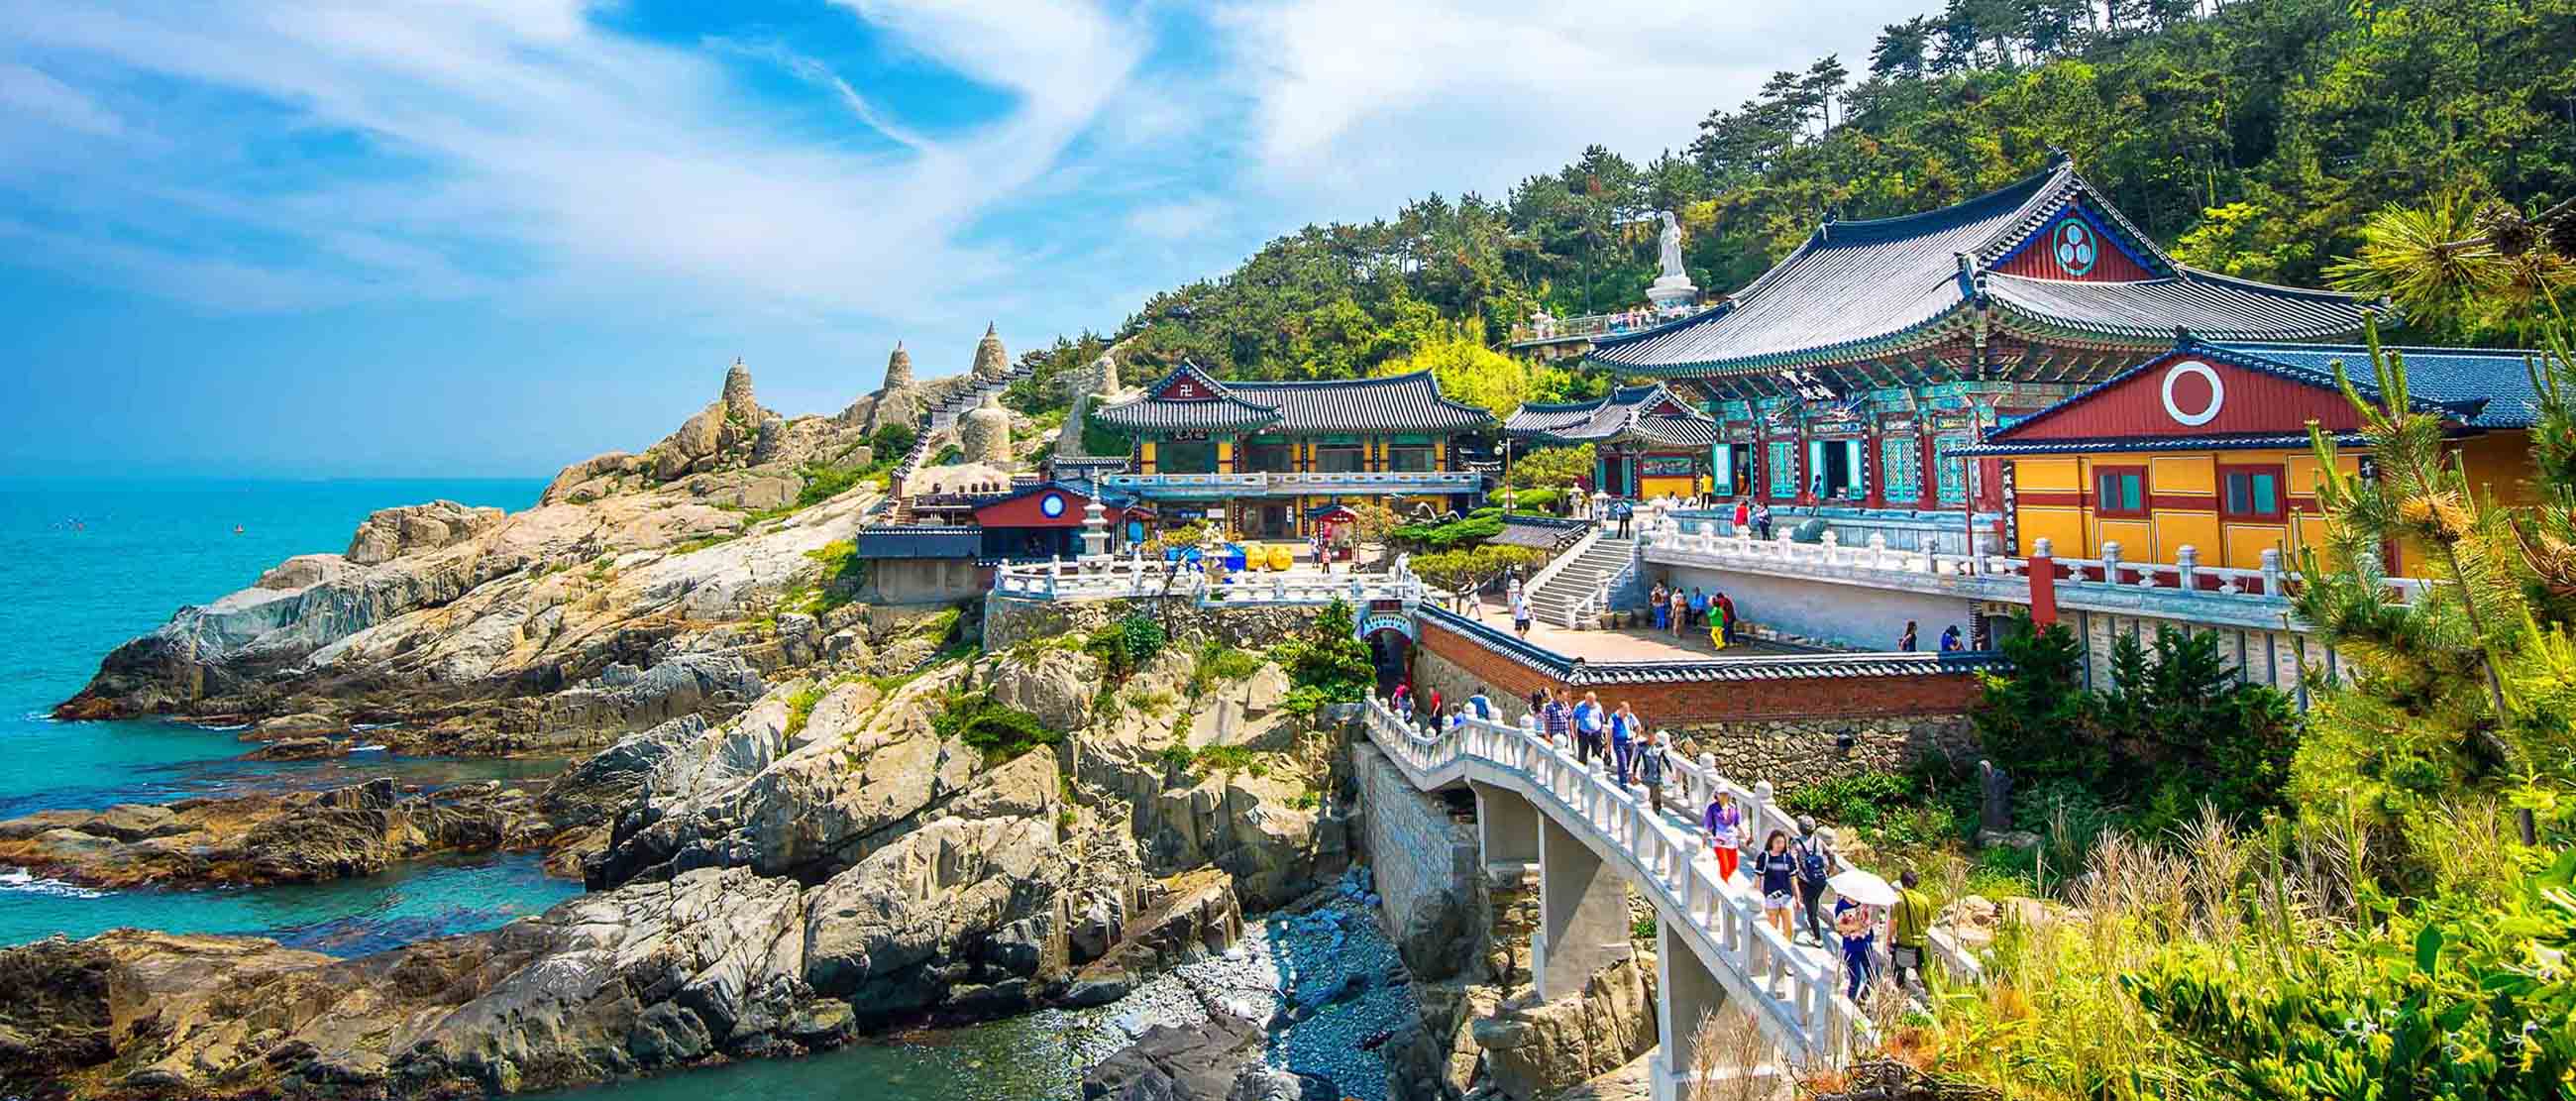 Busan offers a harmonious blend of beaches, food markets, arts and entertainment scenes 